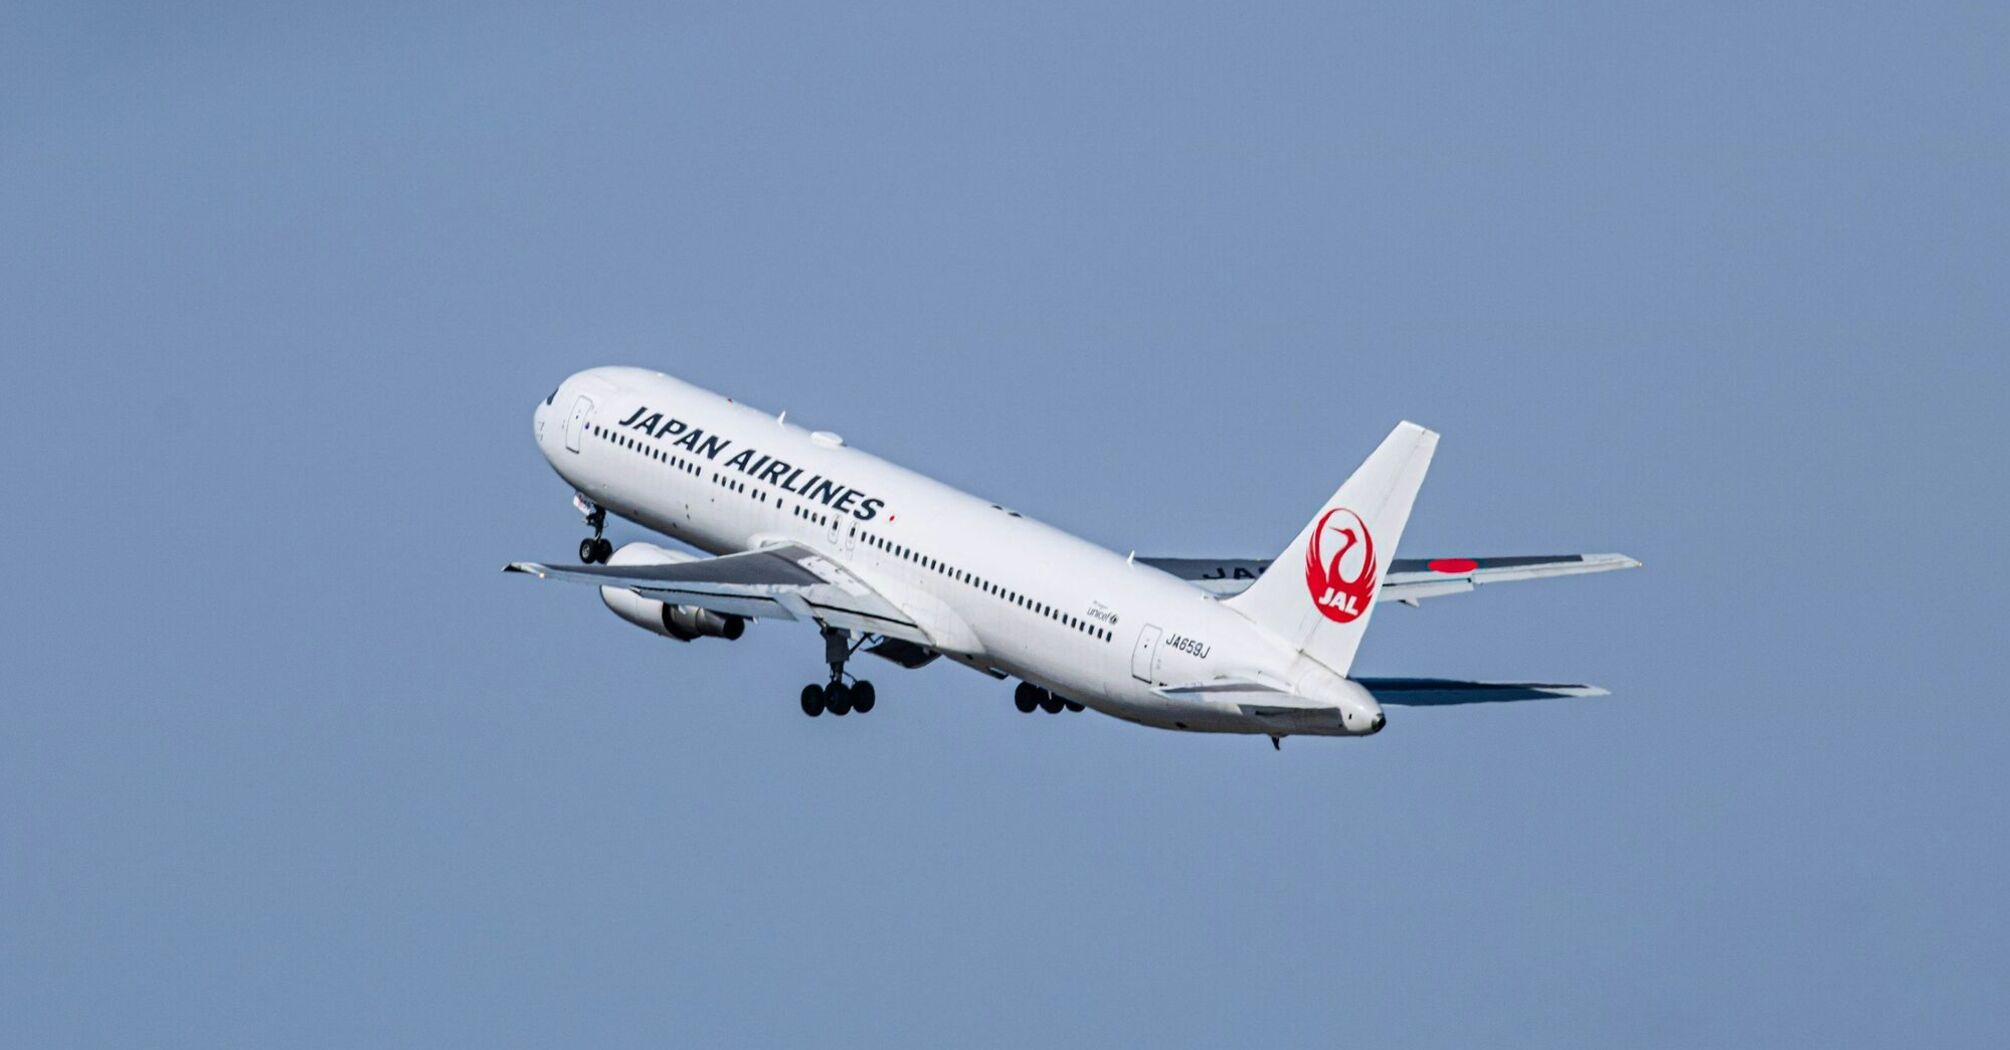 Japan Airlines aircraft taking off